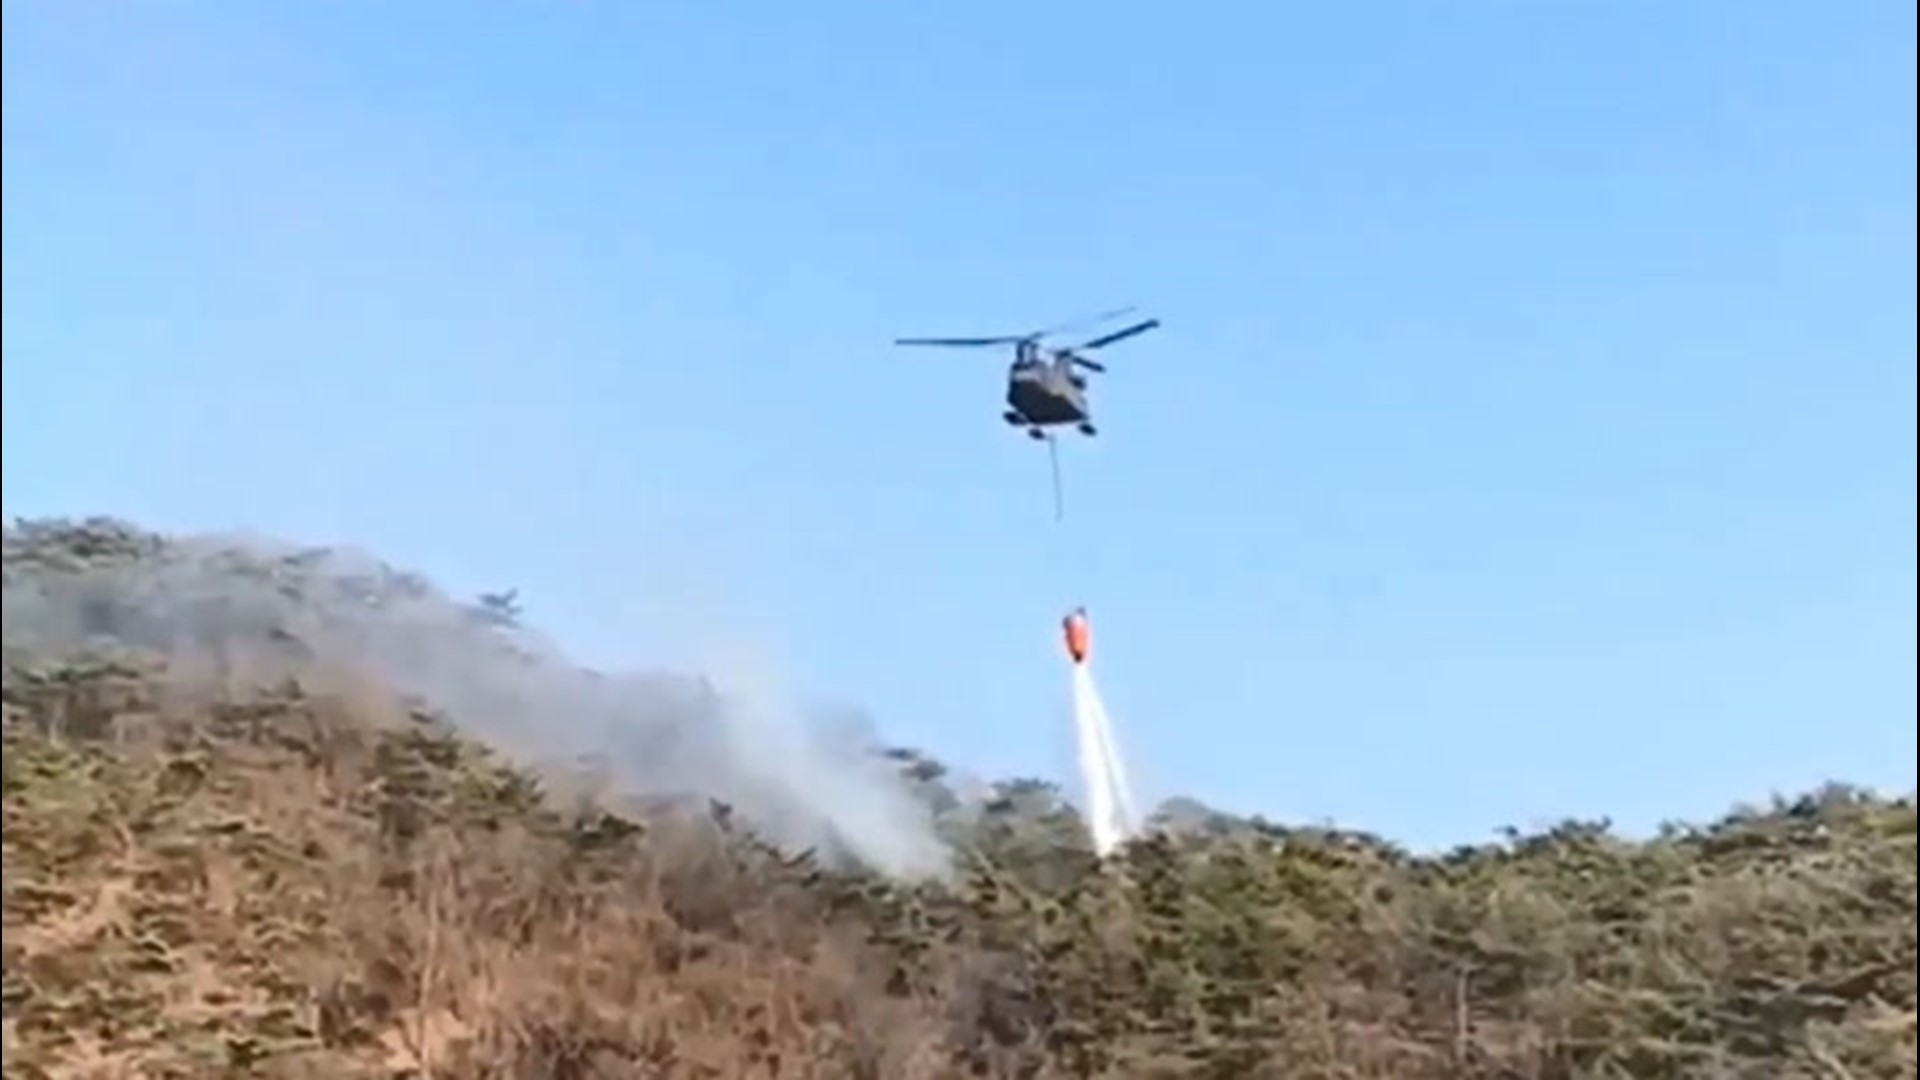 Evacuation advisories were issued around Ashikaga City on Feb. 22 as firefighters launched an aerial assault on the flames.